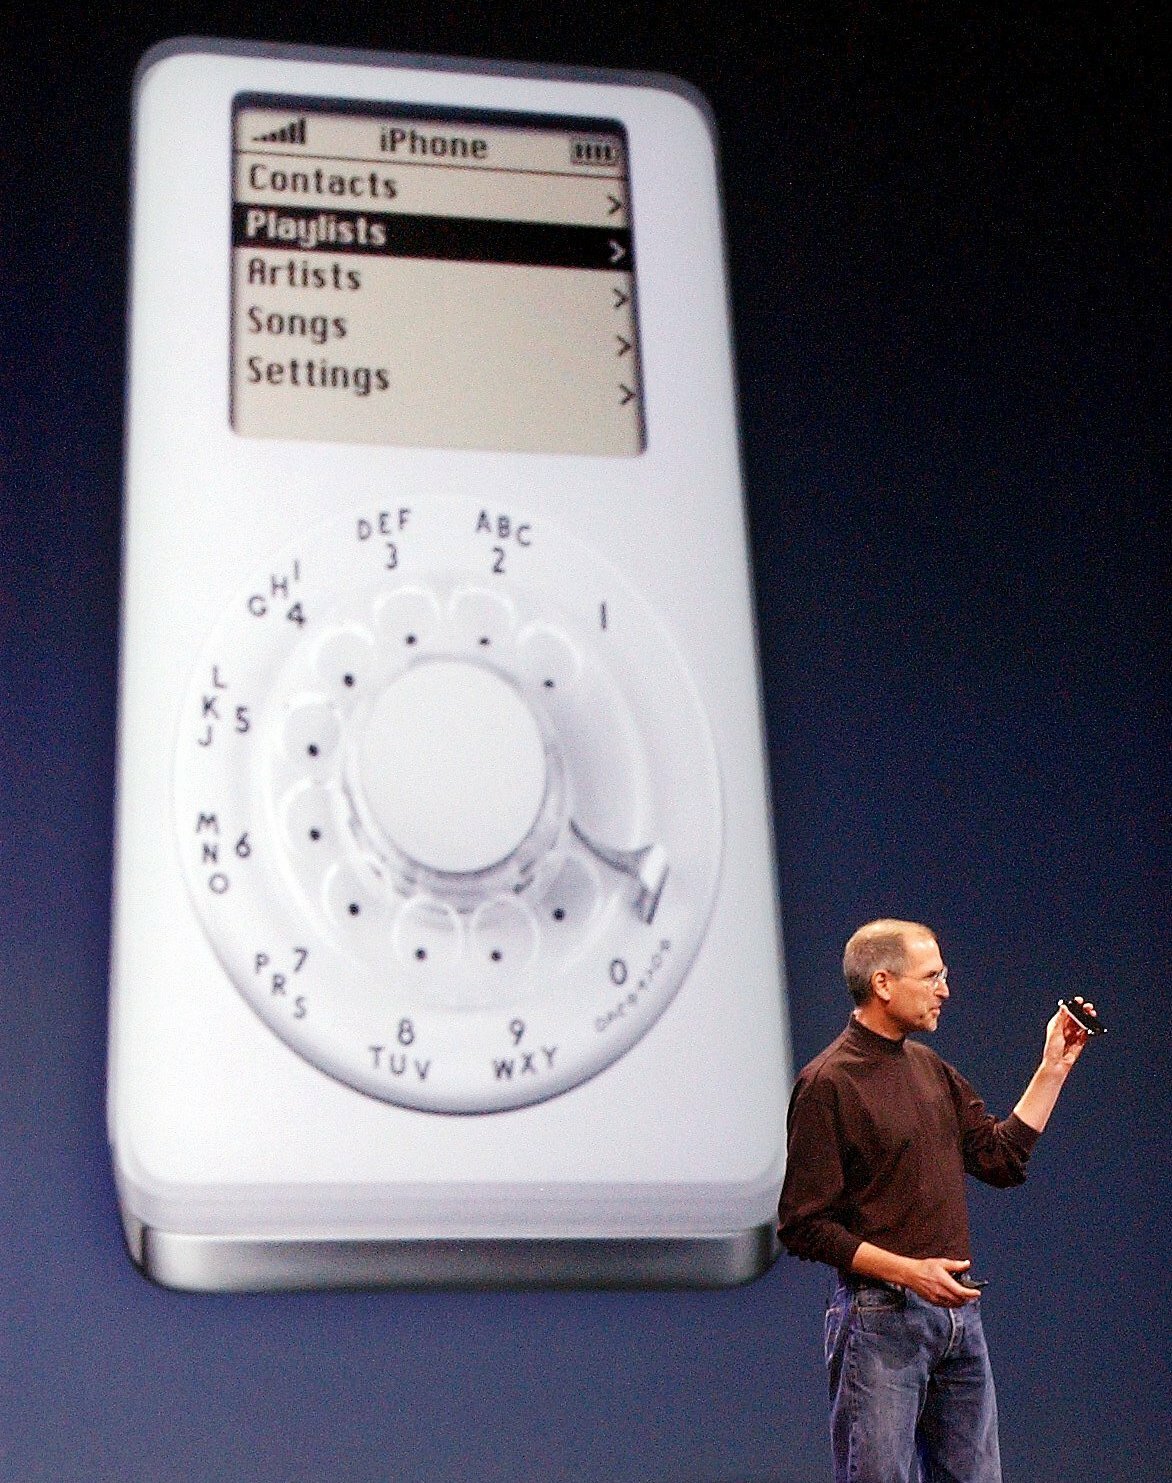 Steve Jobs stands in front of a spoof image of an iPod with a rotary dial, pretending it's the iPhone. 